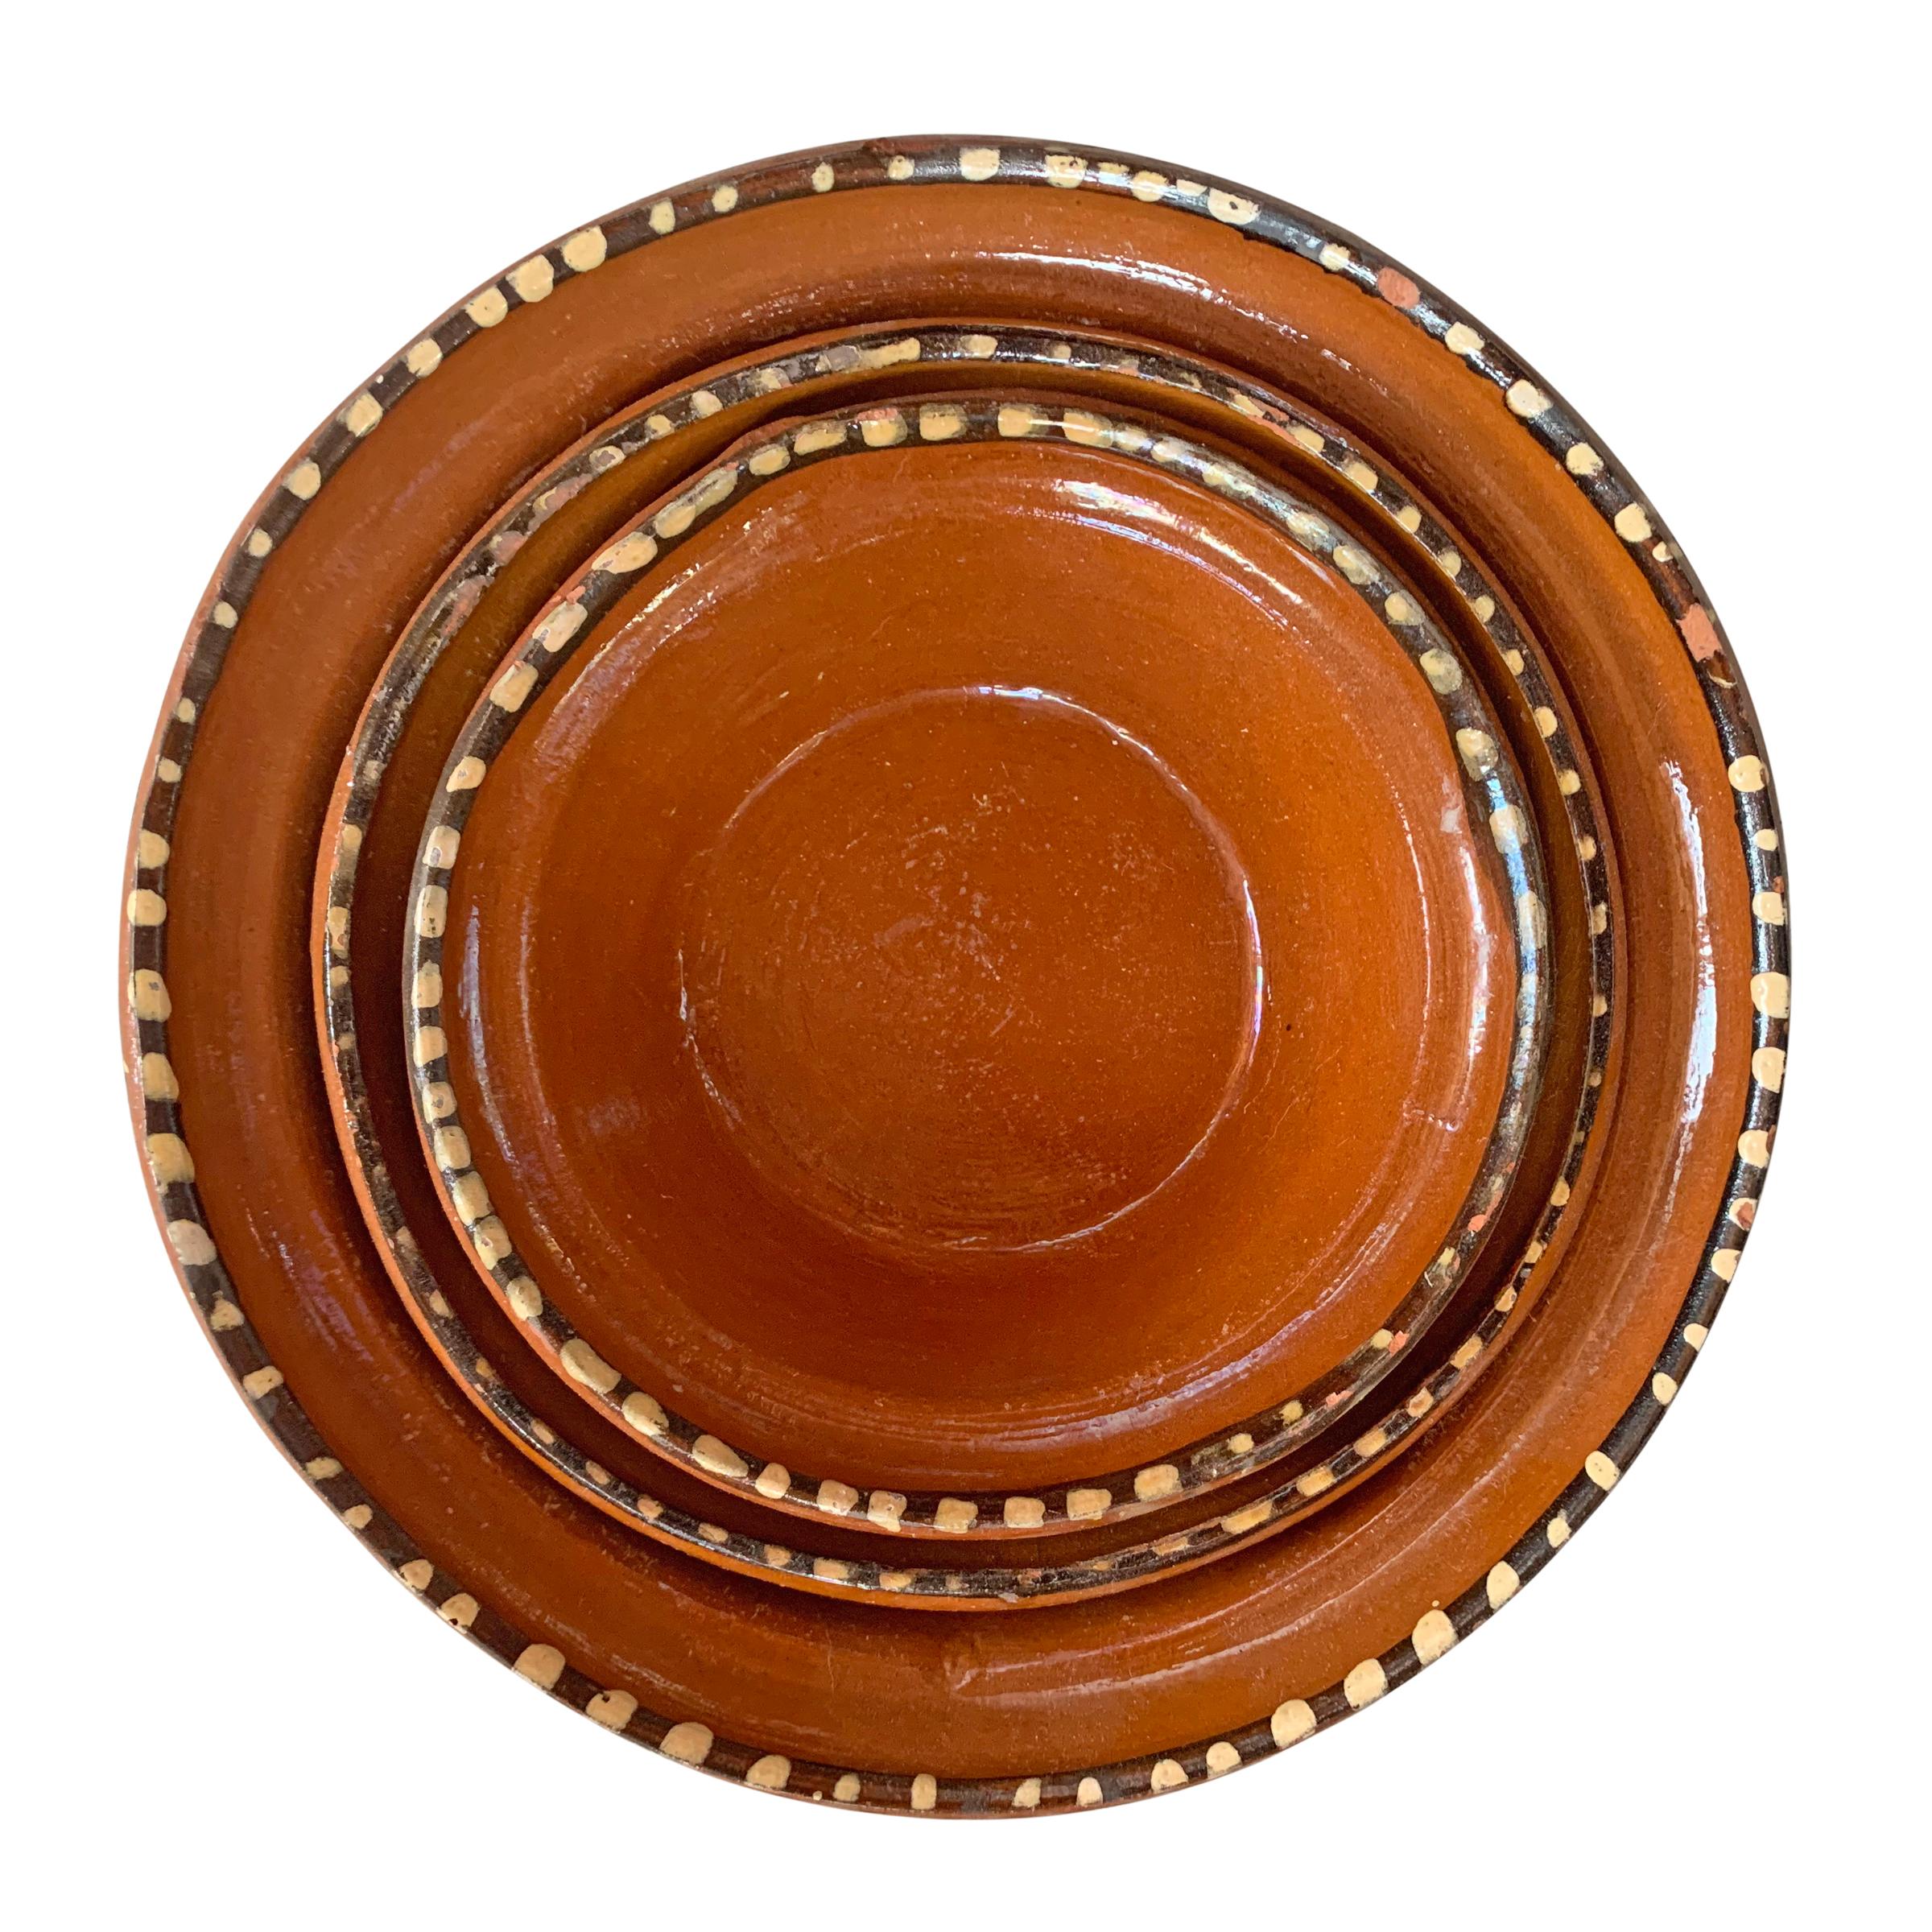 A wonderful set of three Mexican terracotta bowls in graduated size, and each decorated with a yellow and black striped rim. Bowls have a clear glaze on their interiors, and are unglazed on the exterior.

Measures: Small 6 in. diameter x 2 in.